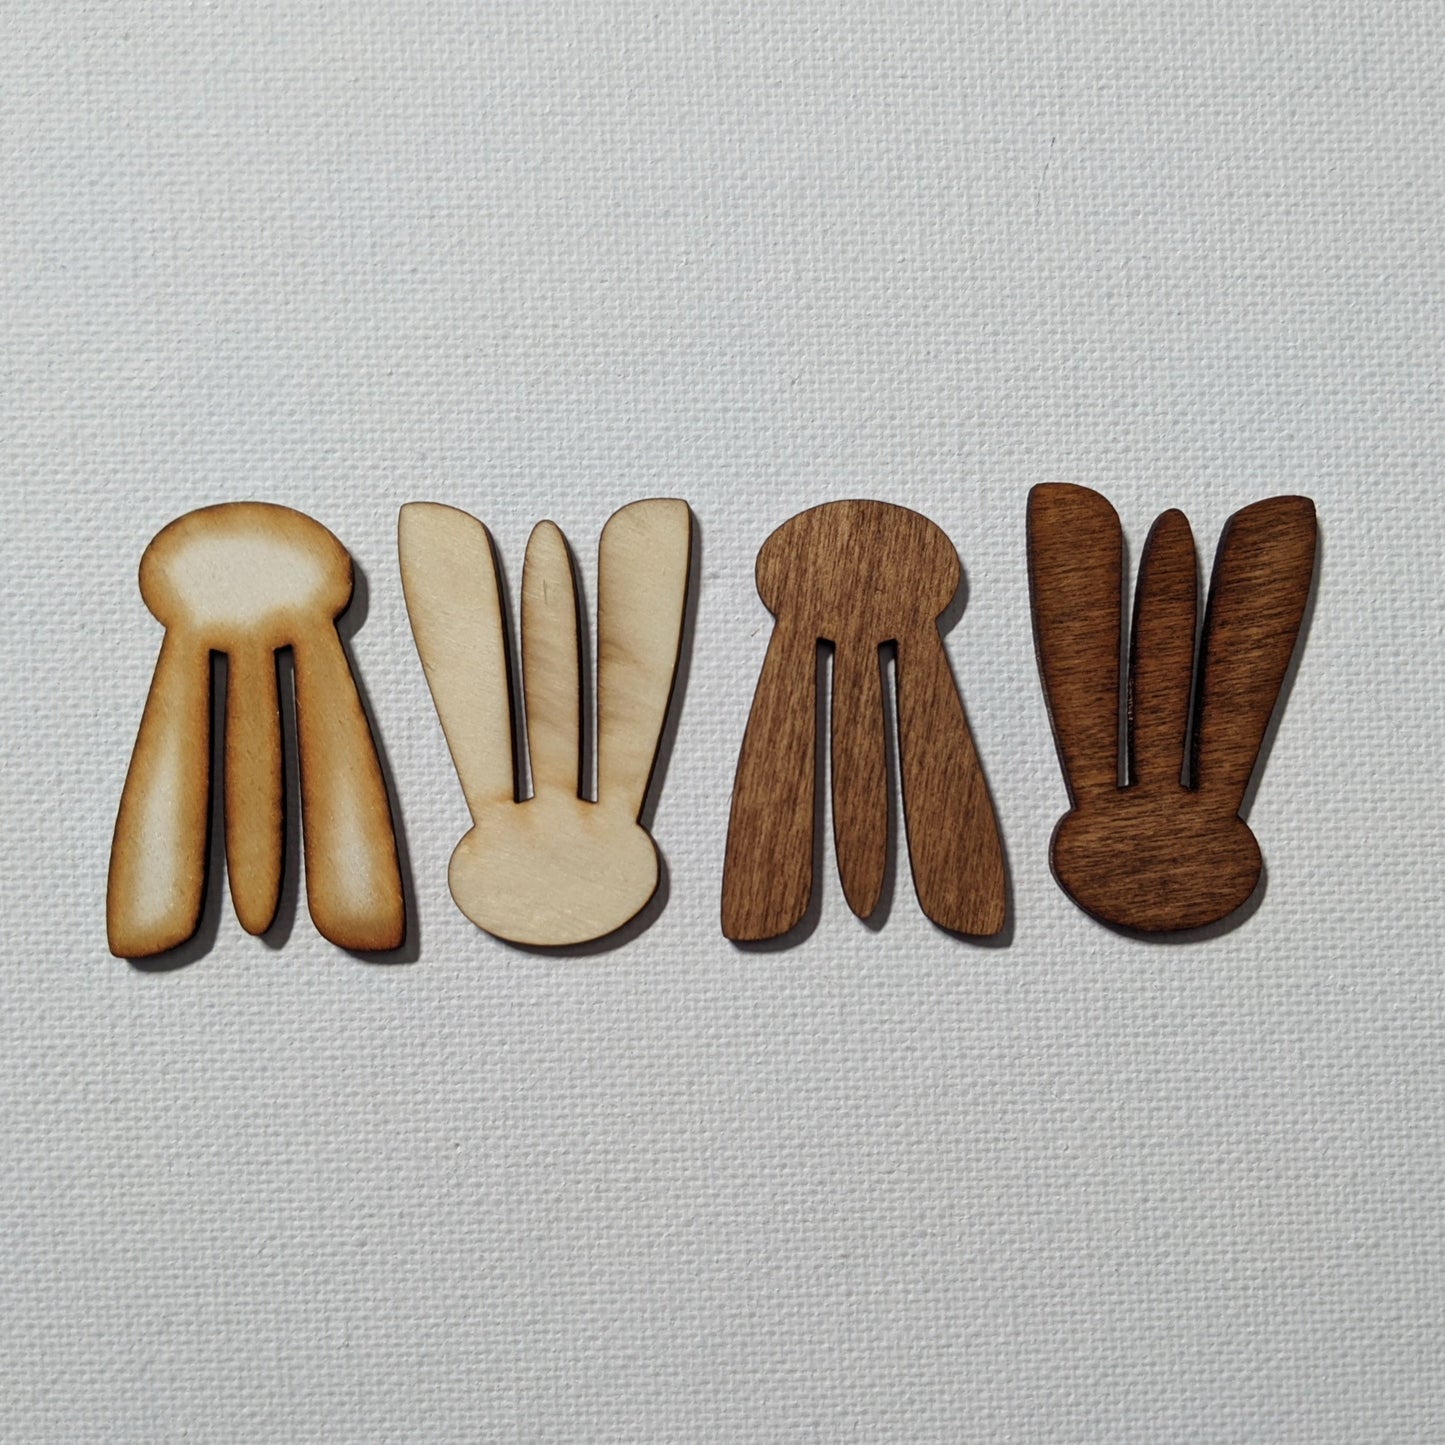 Four 3-pronged wood clips sit on a white textured surface.